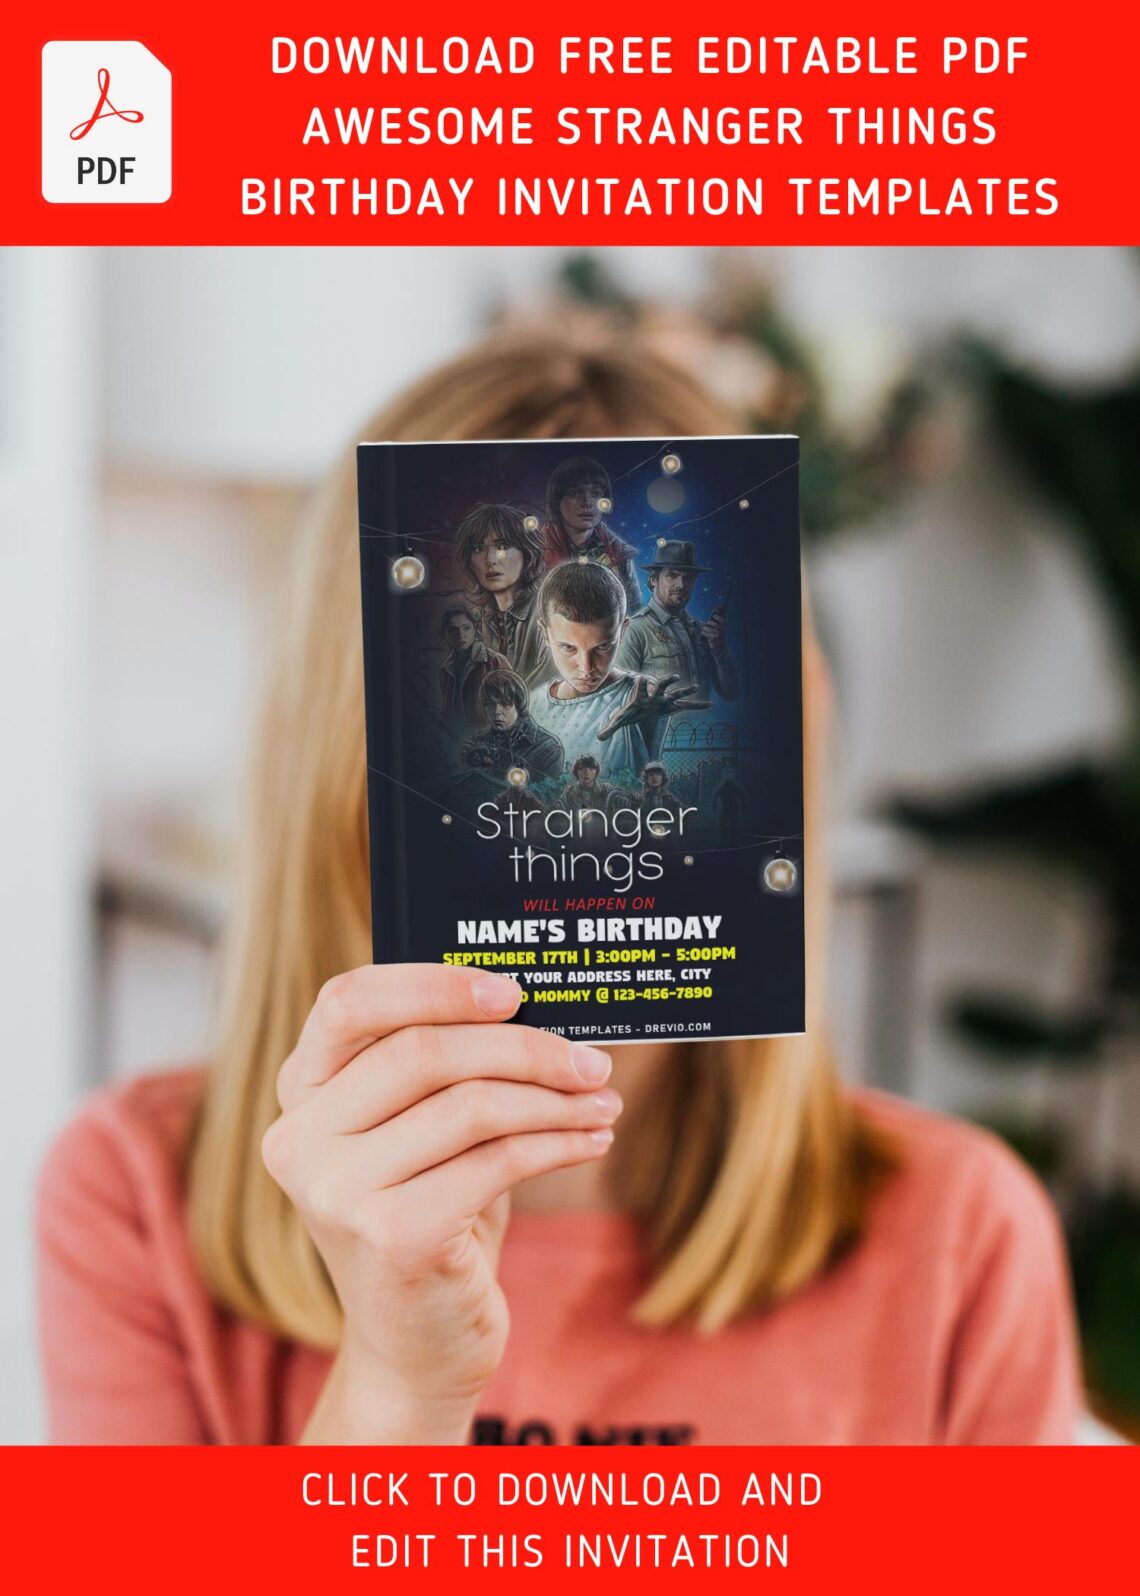 (Free Editable PDF) Awesome Stranger Things Sleepover Birthday Invitation Templates with epic Stranger Things poster